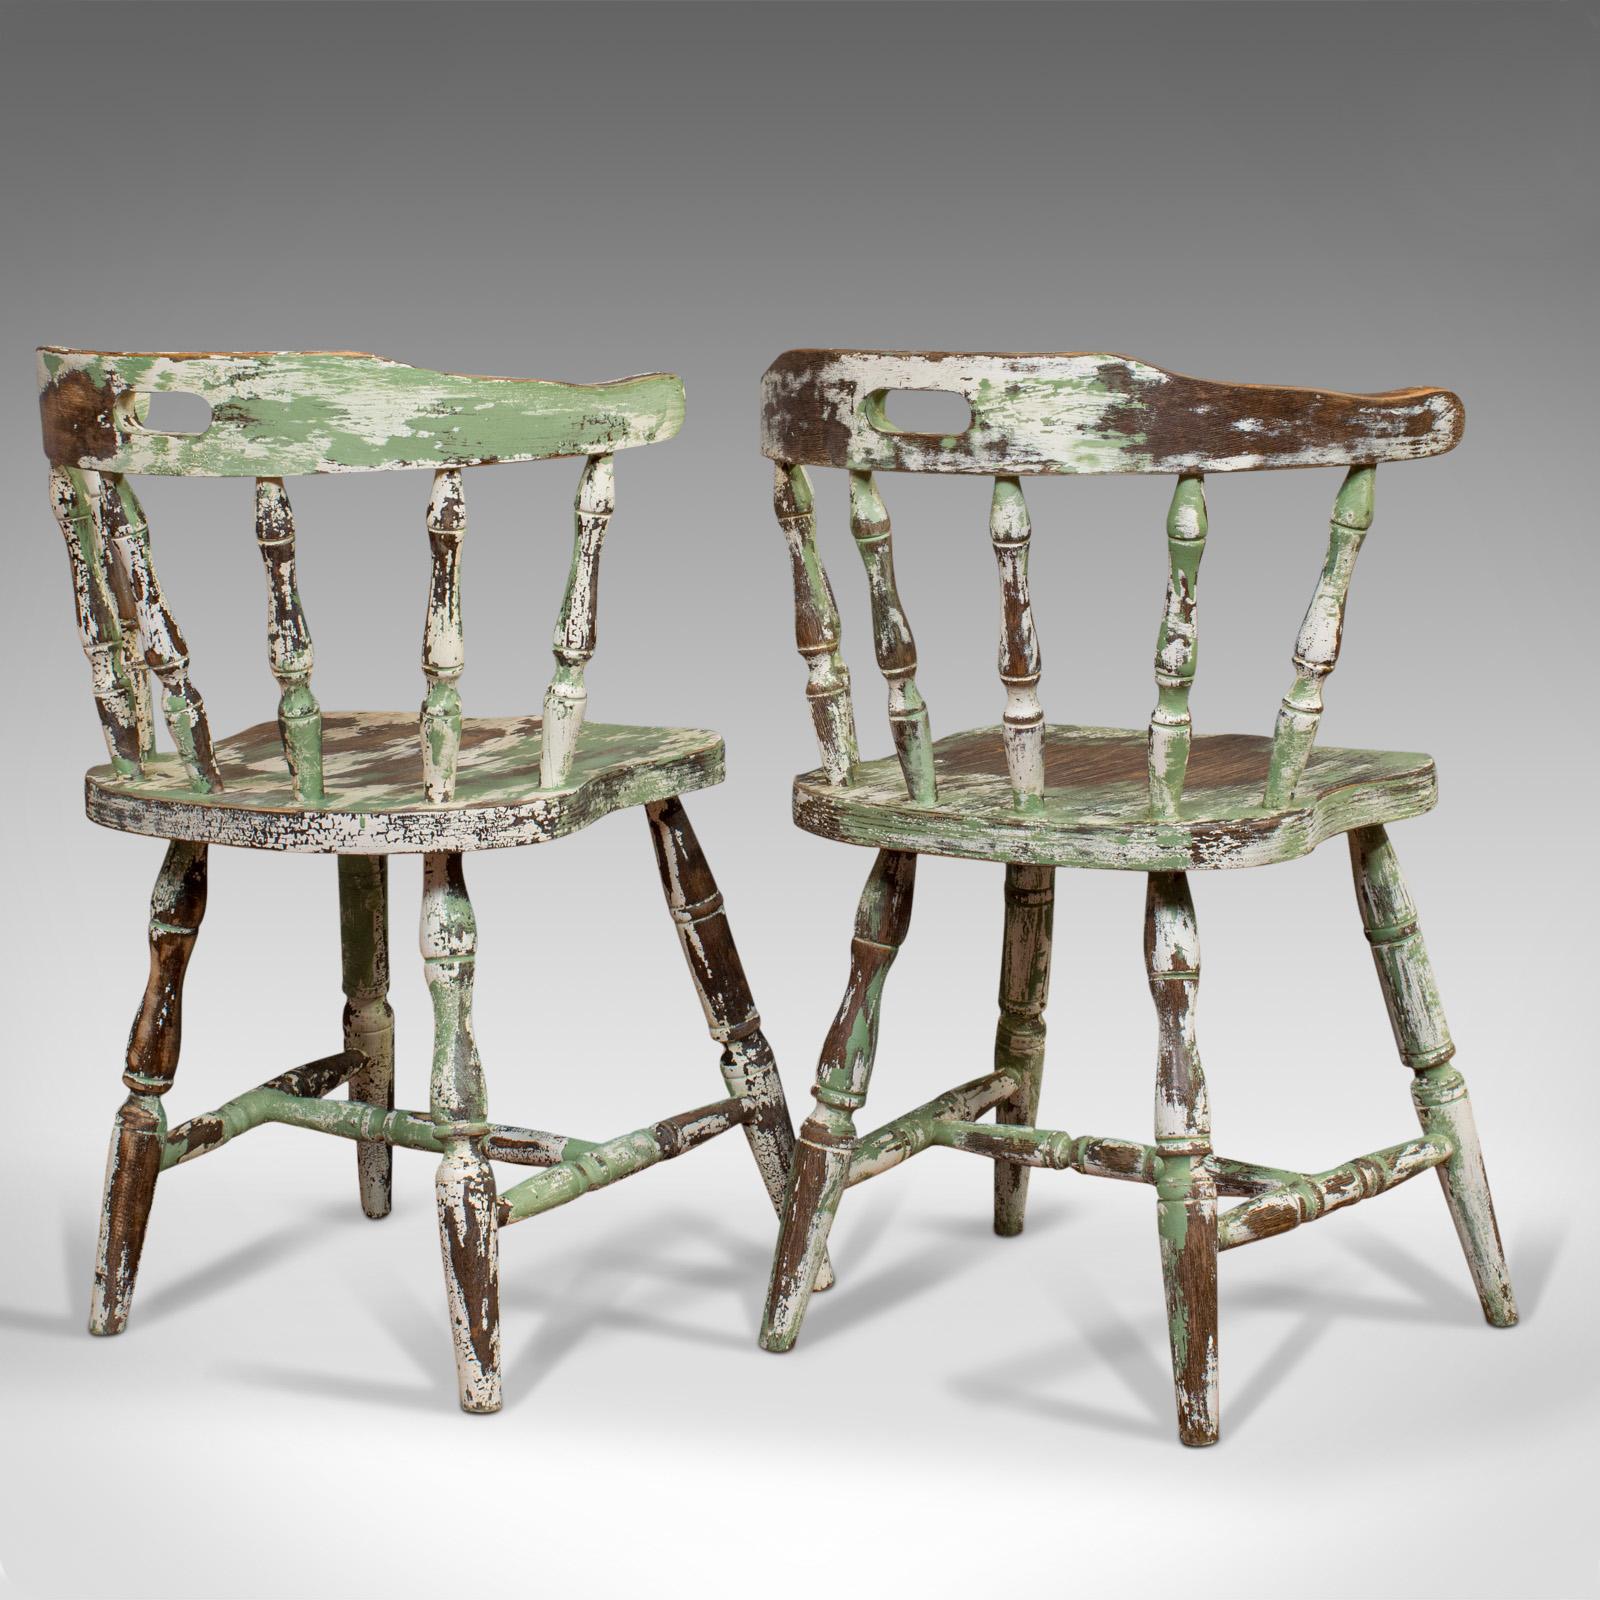 Late Victorian Pair of Antique Windsor Chairs, French, Beech, Bow Back Chair, Late 19th Century